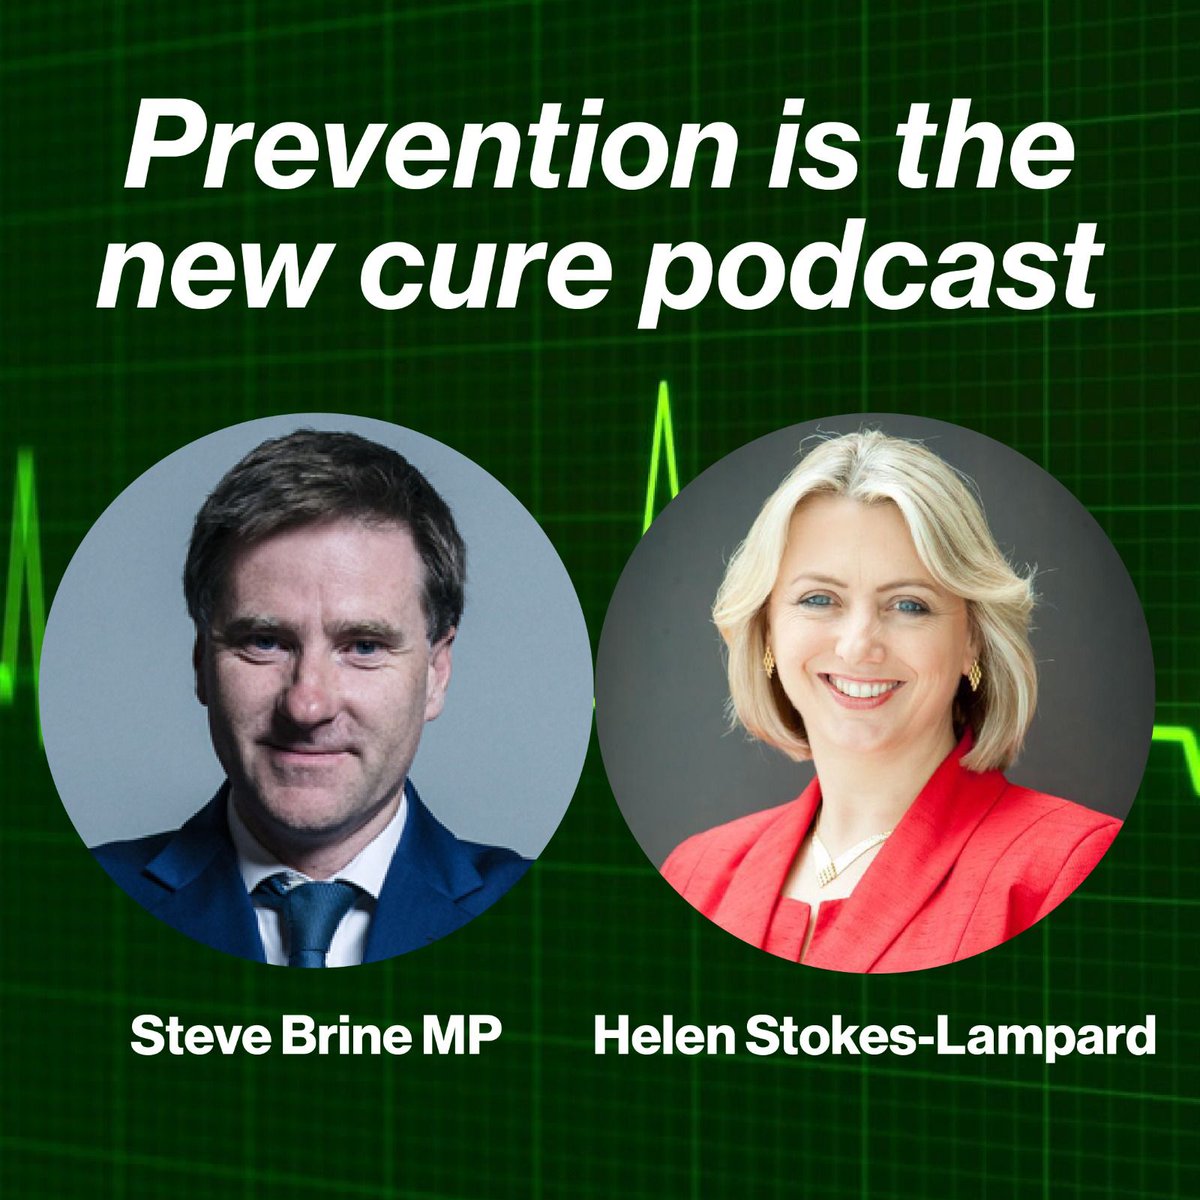 🚨| New Episode The long awaited special with the @DHSCgovuk Secretary of State, @VictoriaAtkins, is available here linktr.ee/PITNC @BrineMP and @HelenStokesLam put your questions to the Secretary of State as well as discussing Pharmacy First, smoking and vaping.